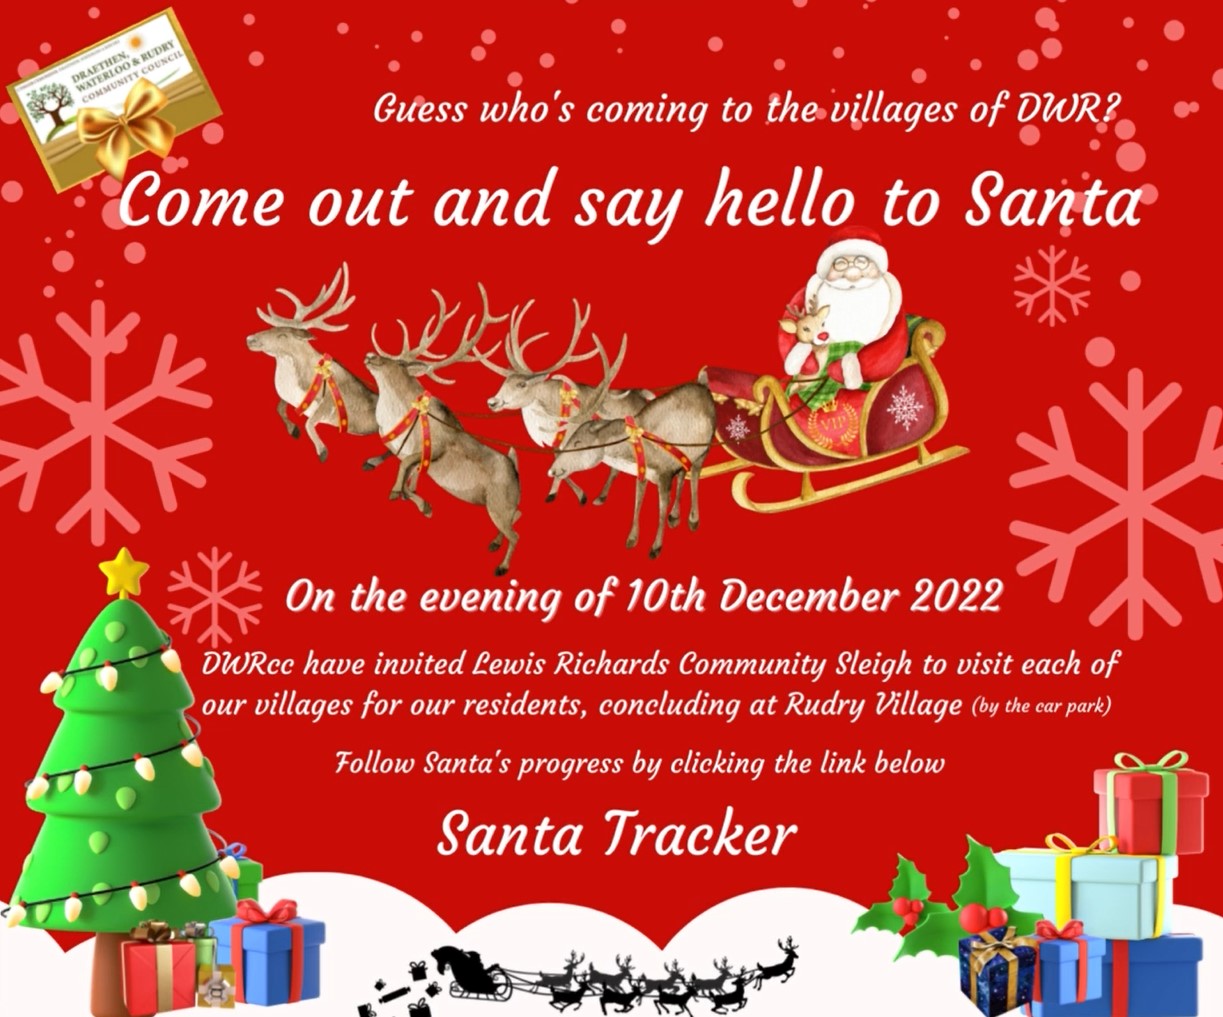 Santa is coming to DWRcc